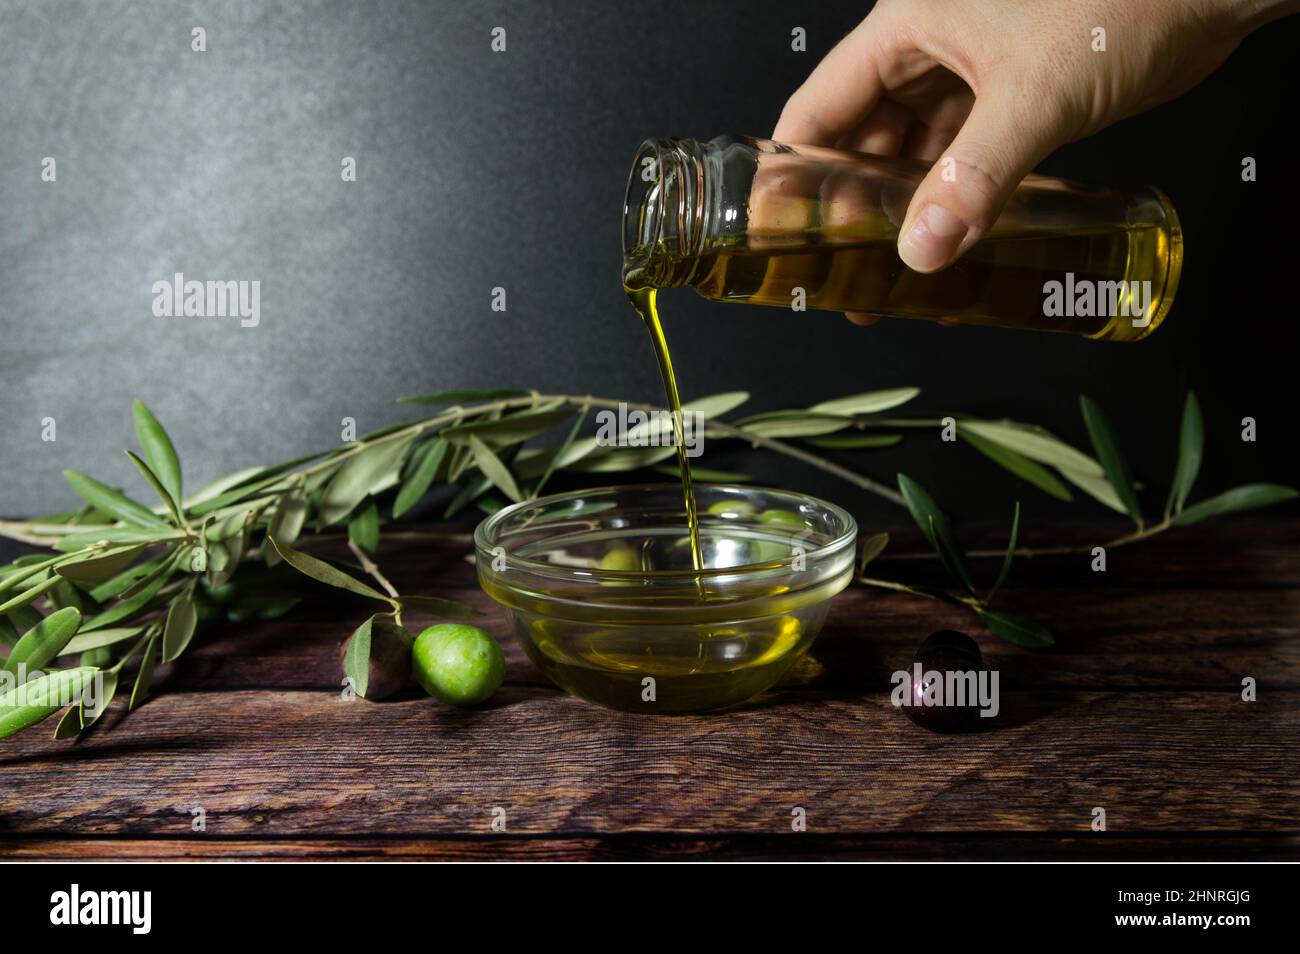 Hand pouring olive oil on wooden table Stock Photo